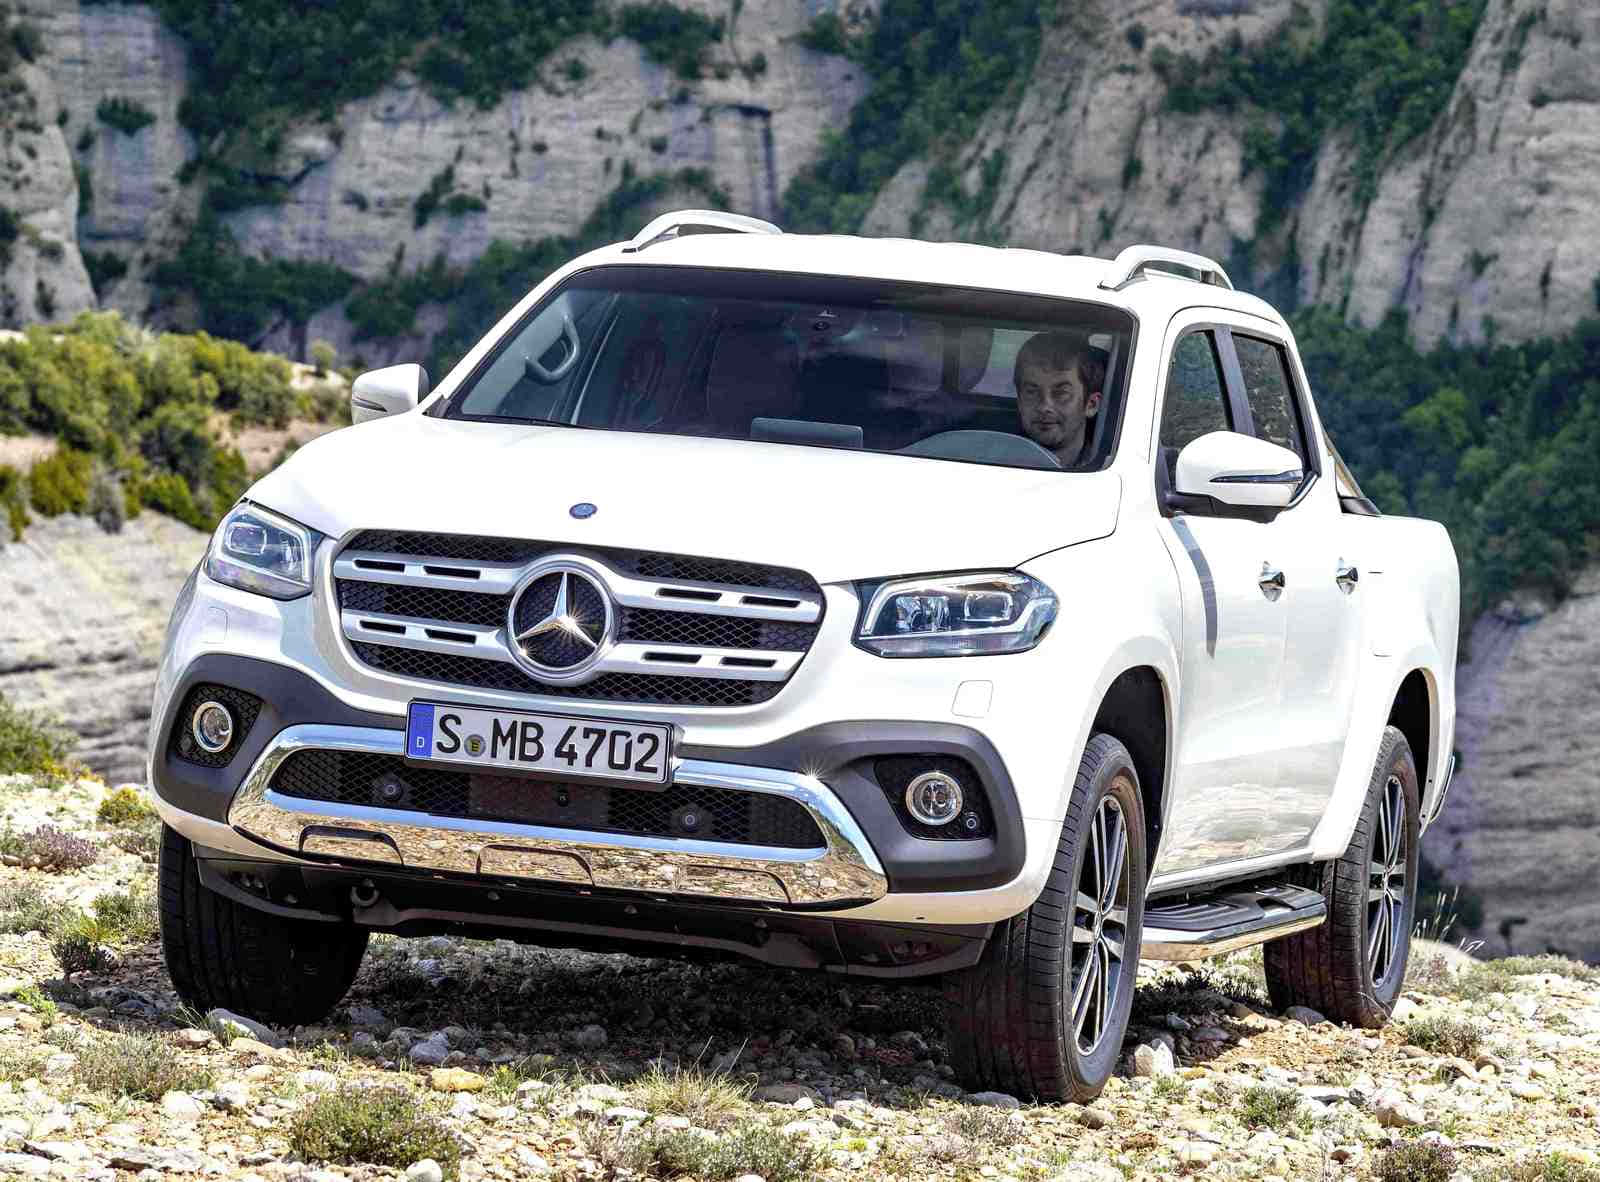 Caption: The Ultimate Driving Experience: Mercedes Benz X-class Wallpaper